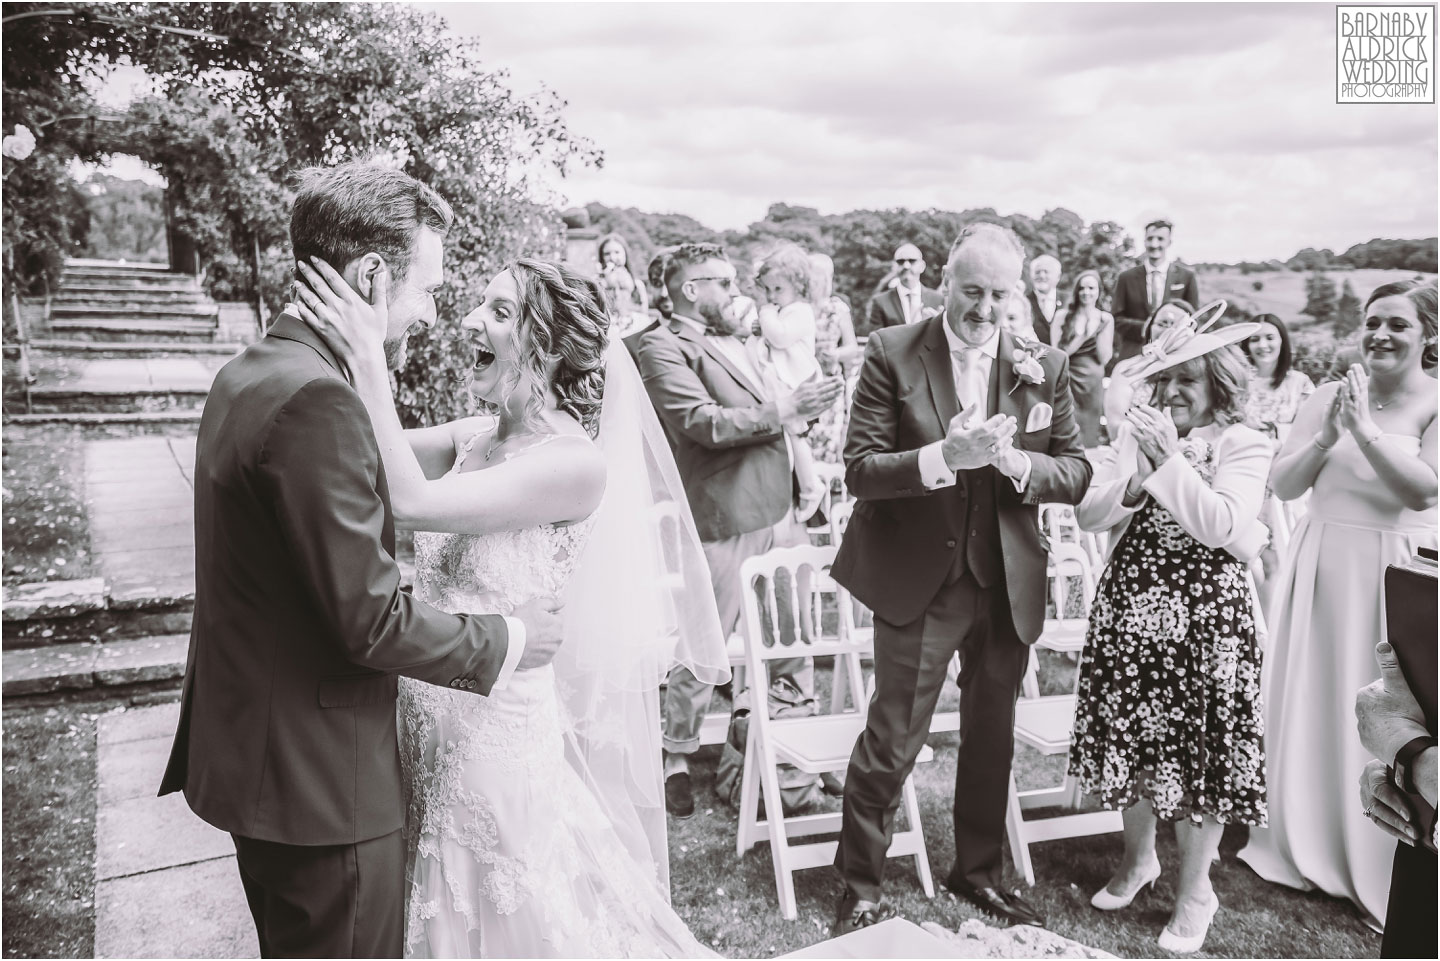 Outdoor wedding ceremony at Wood Hall, Wood Hall Wetherby, terraced Garden wood hall